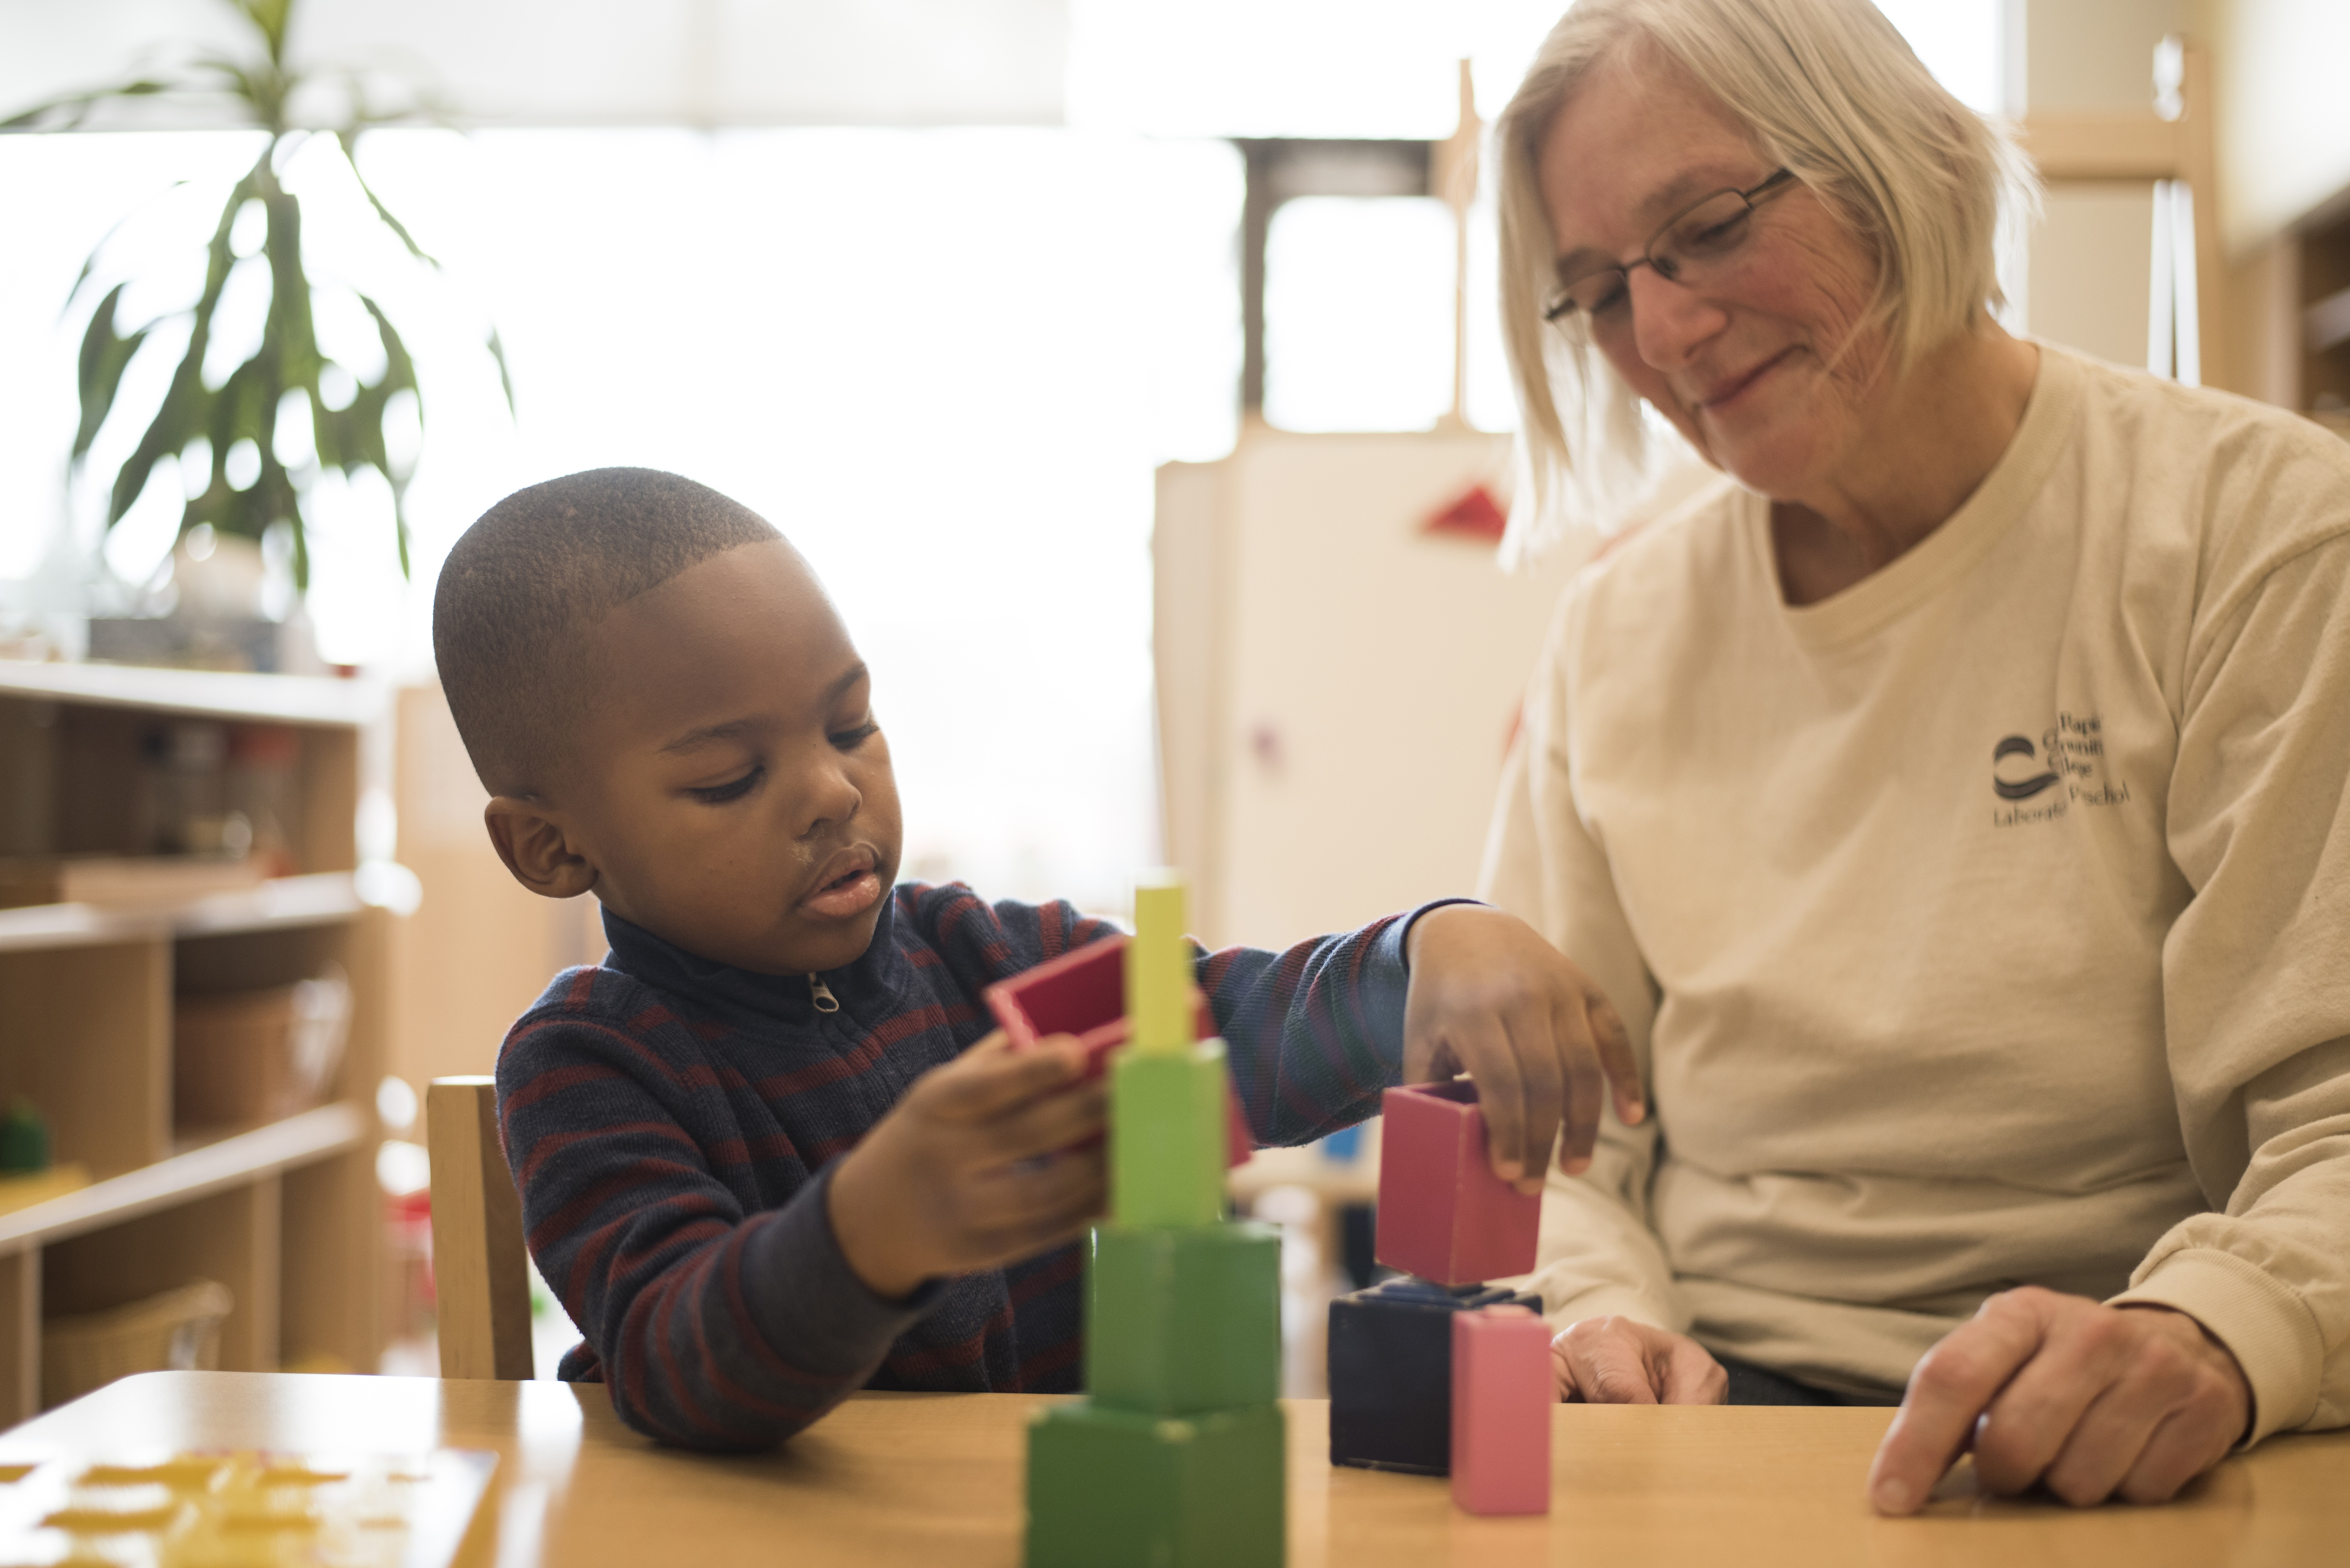 GRCC  Preschool student and faculty member playing with blocks